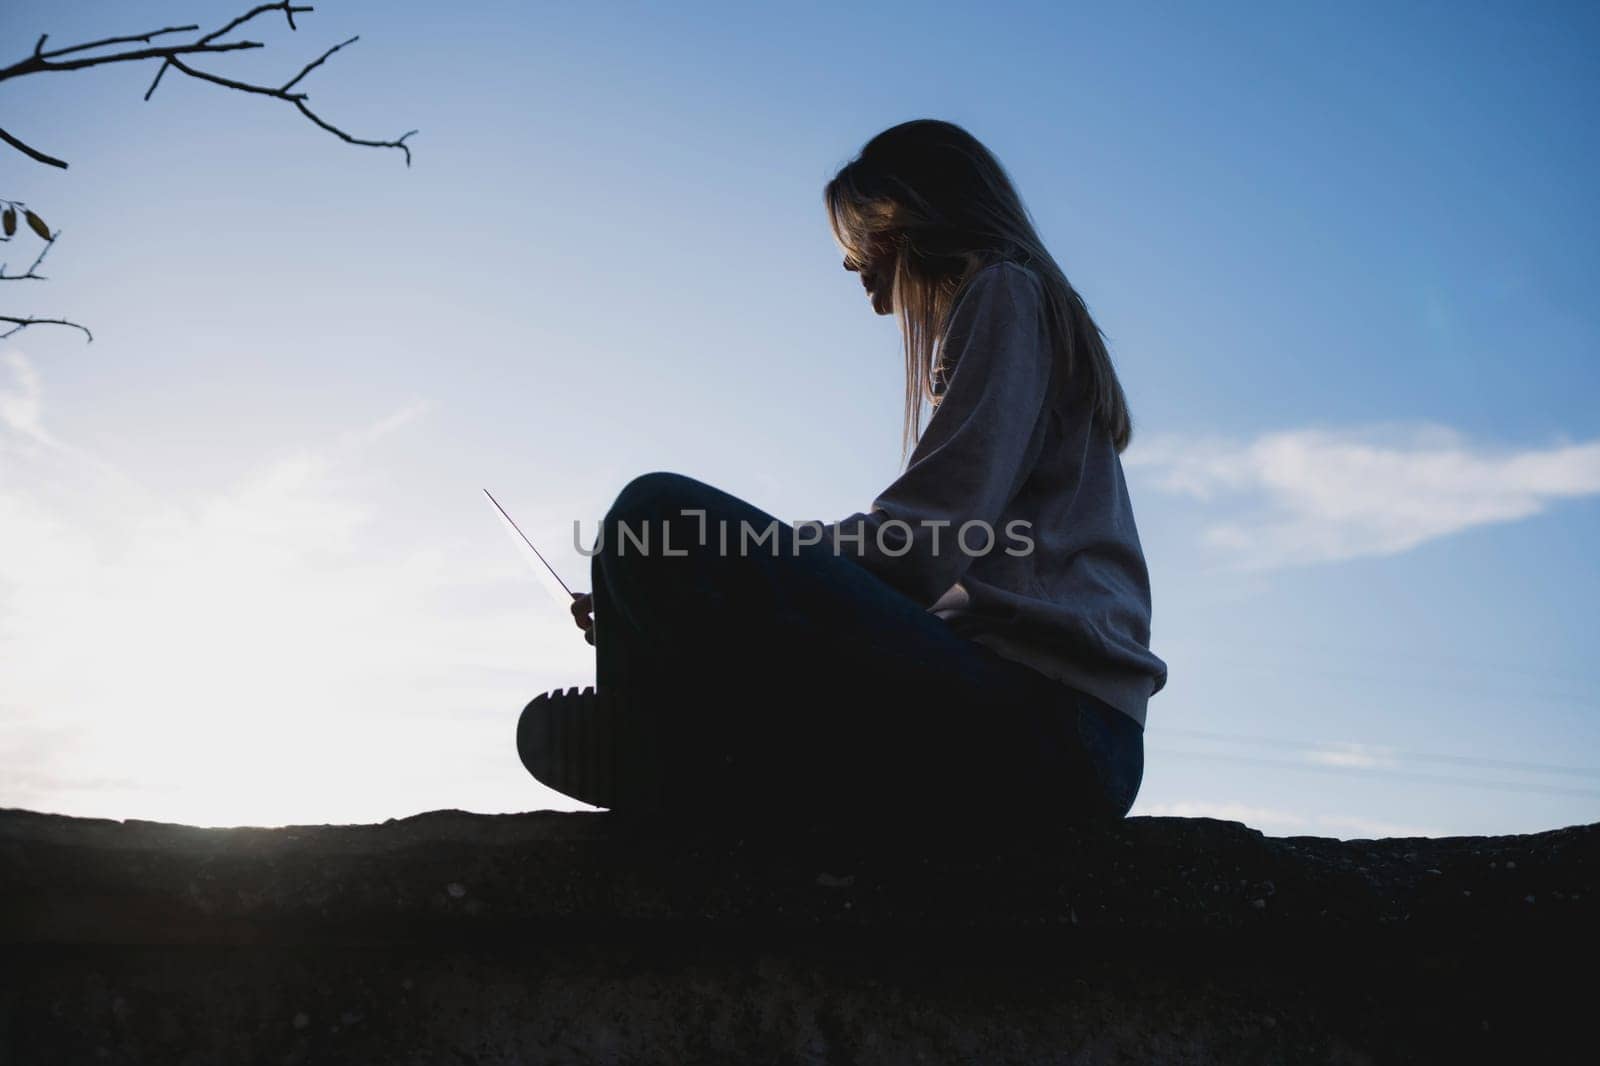 Woman freelancer uses laptop on cement wall outdoors against the sky. The woman to be focused on her work or enjoying some leisure time while using her laptop